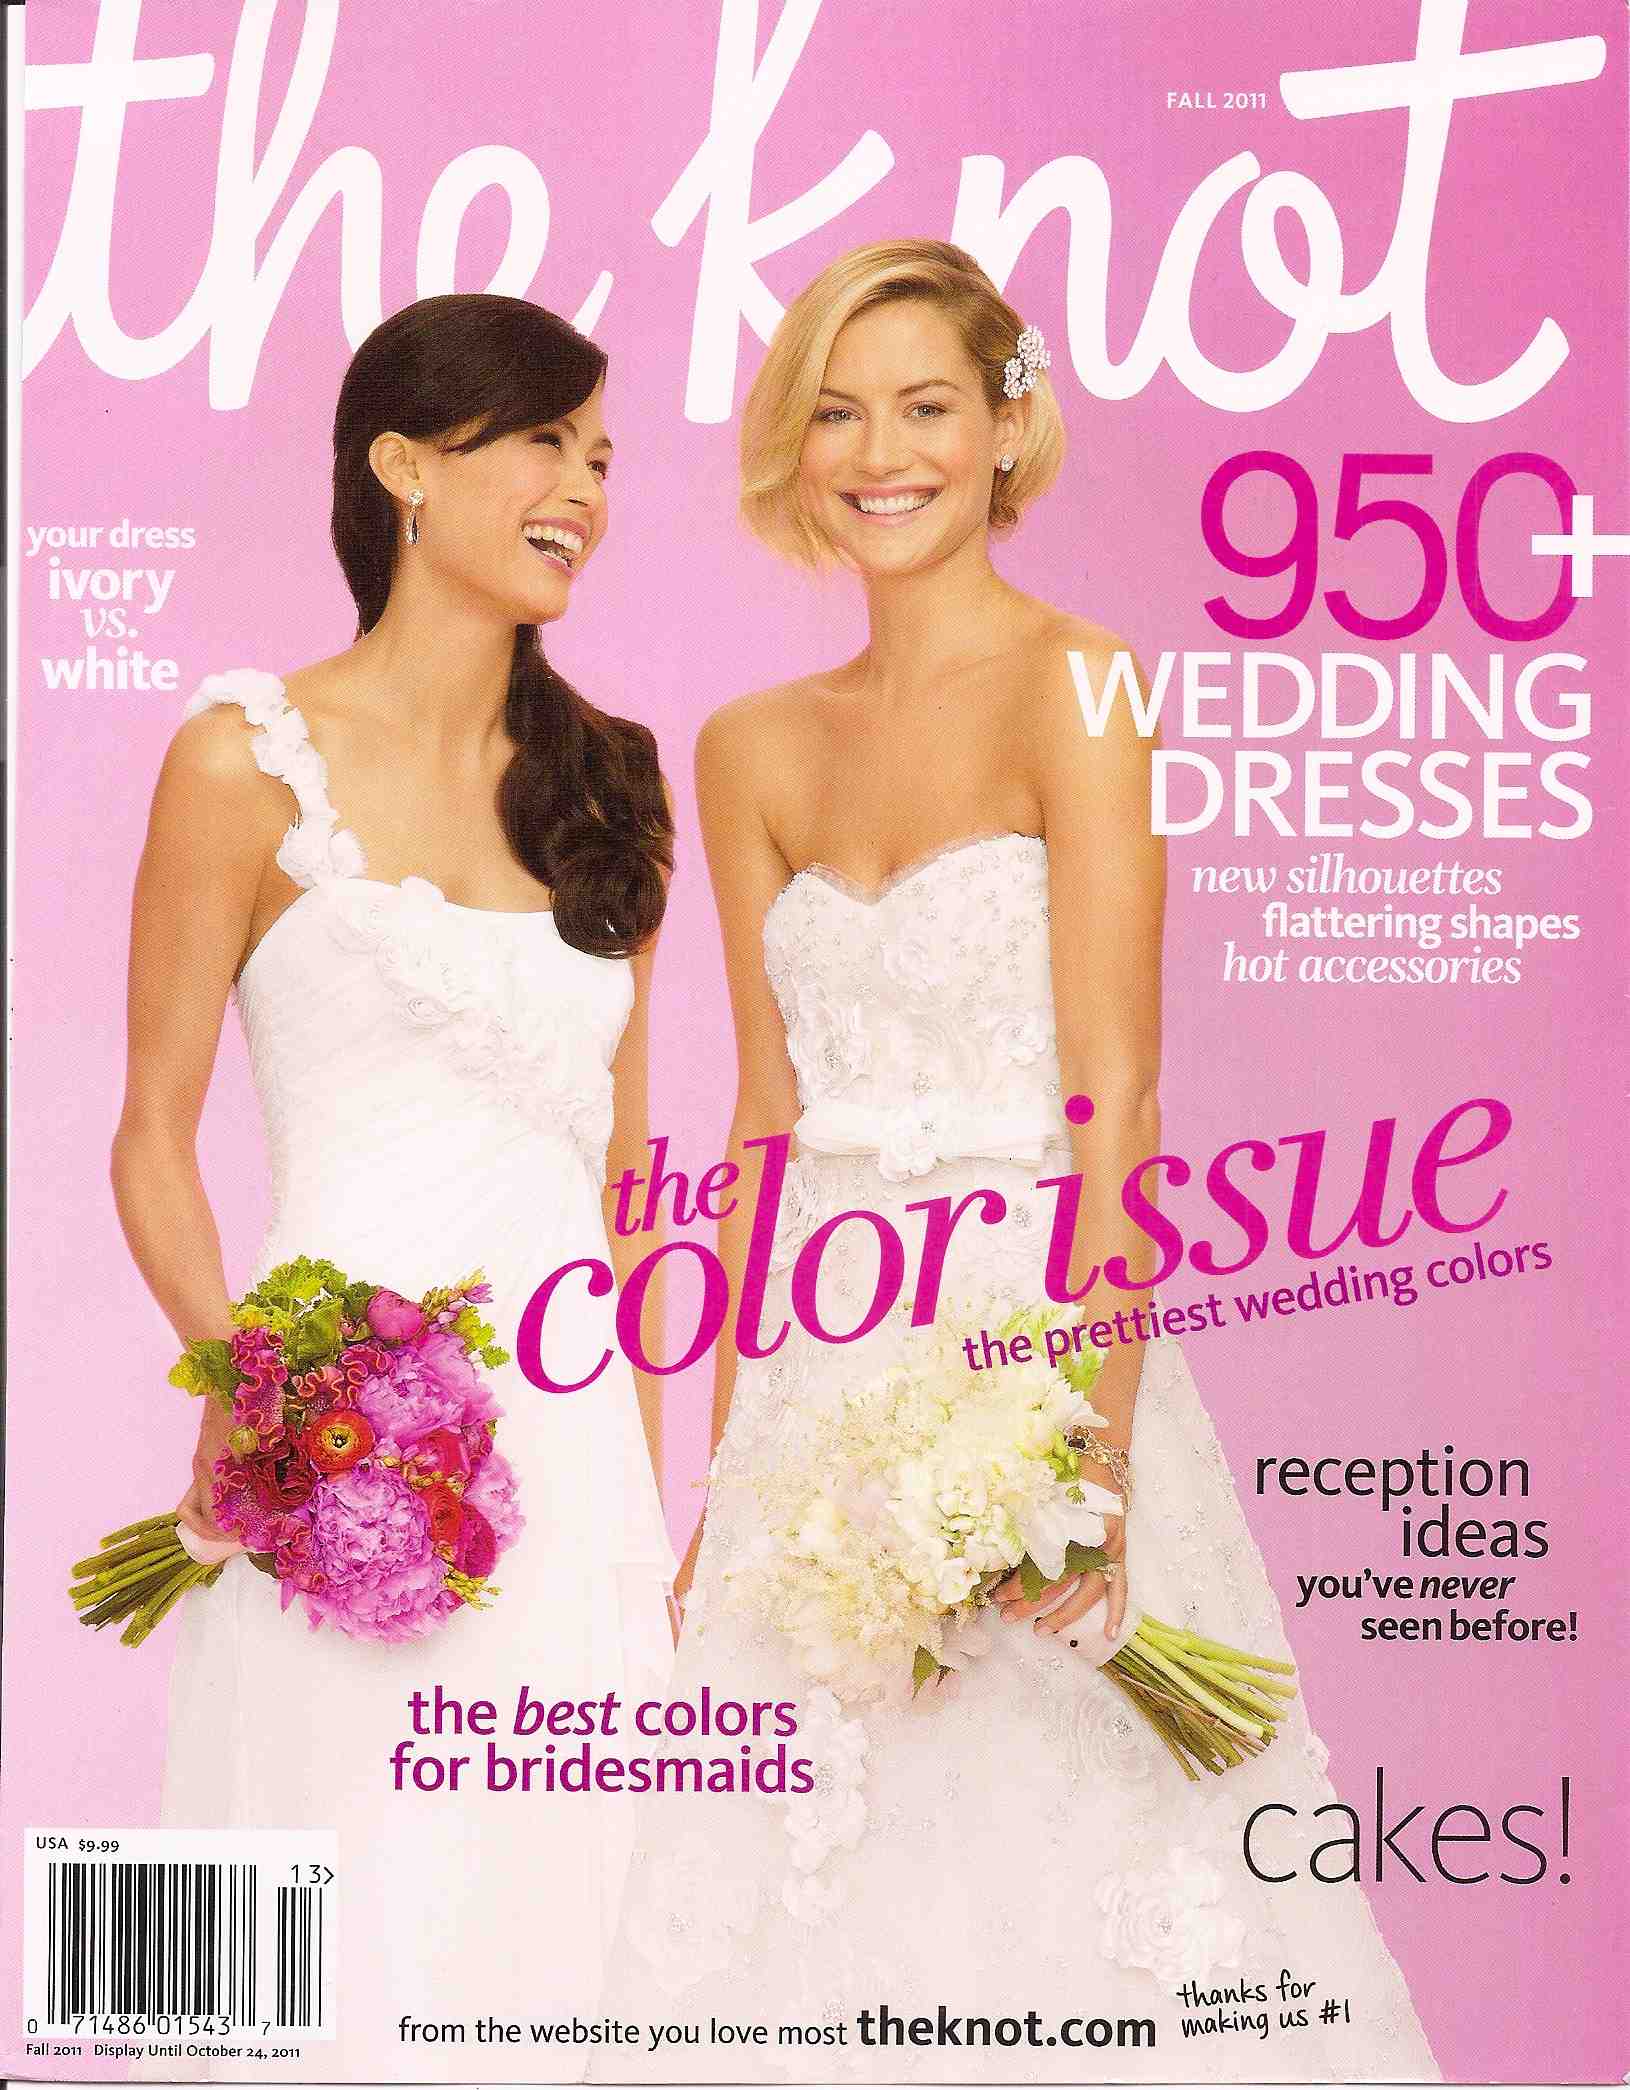 theknot_Fall2011_Cover.jpg